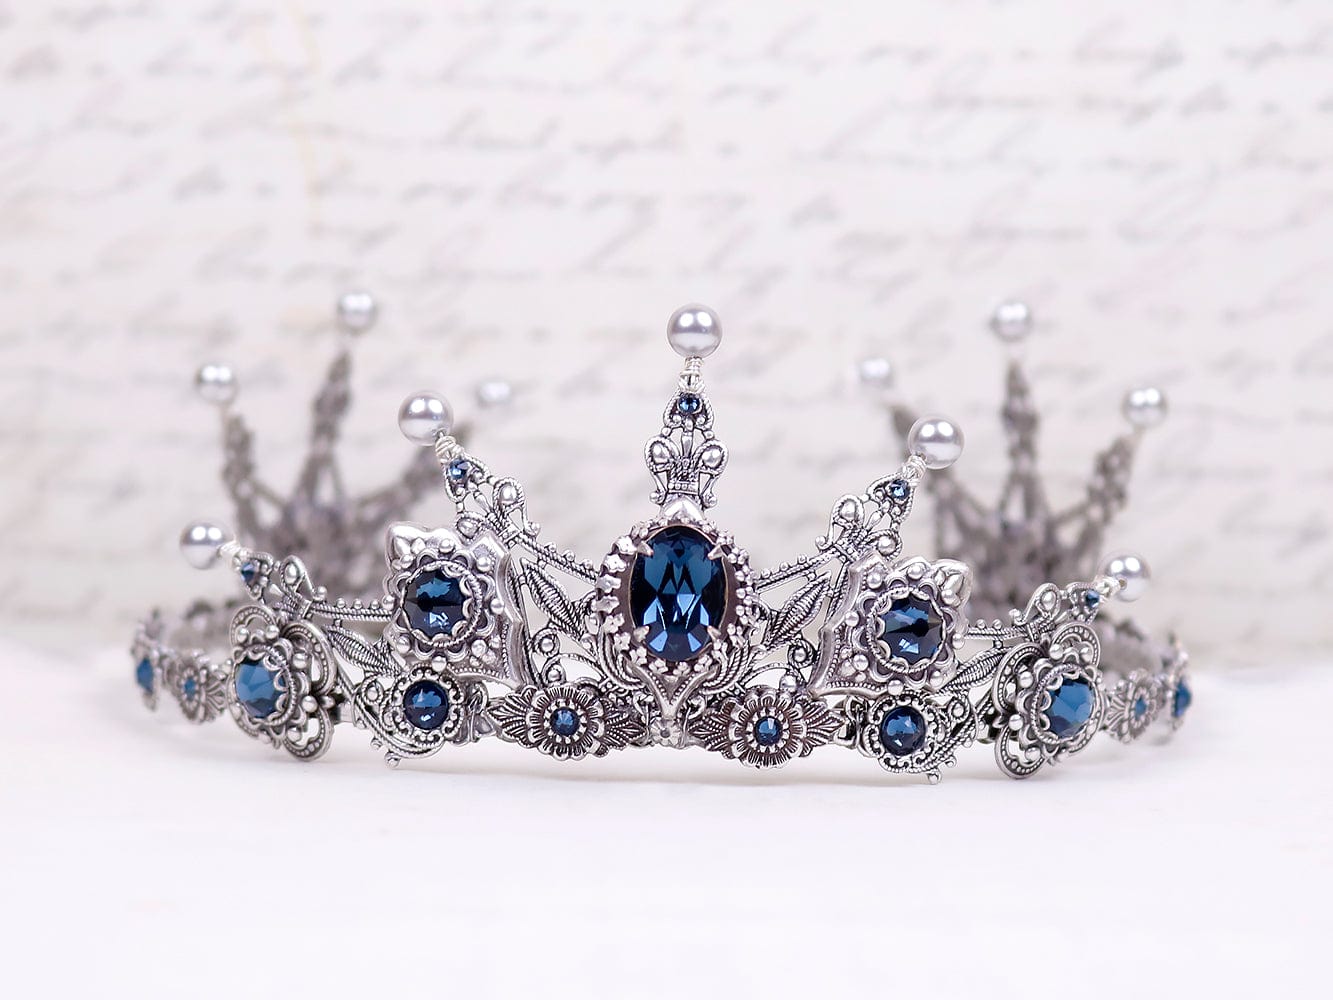 Avalon Pearl Tiara in Antiqued Silver by Rabbitwood and Reason. Stones featured: Montana and Silver Pearl